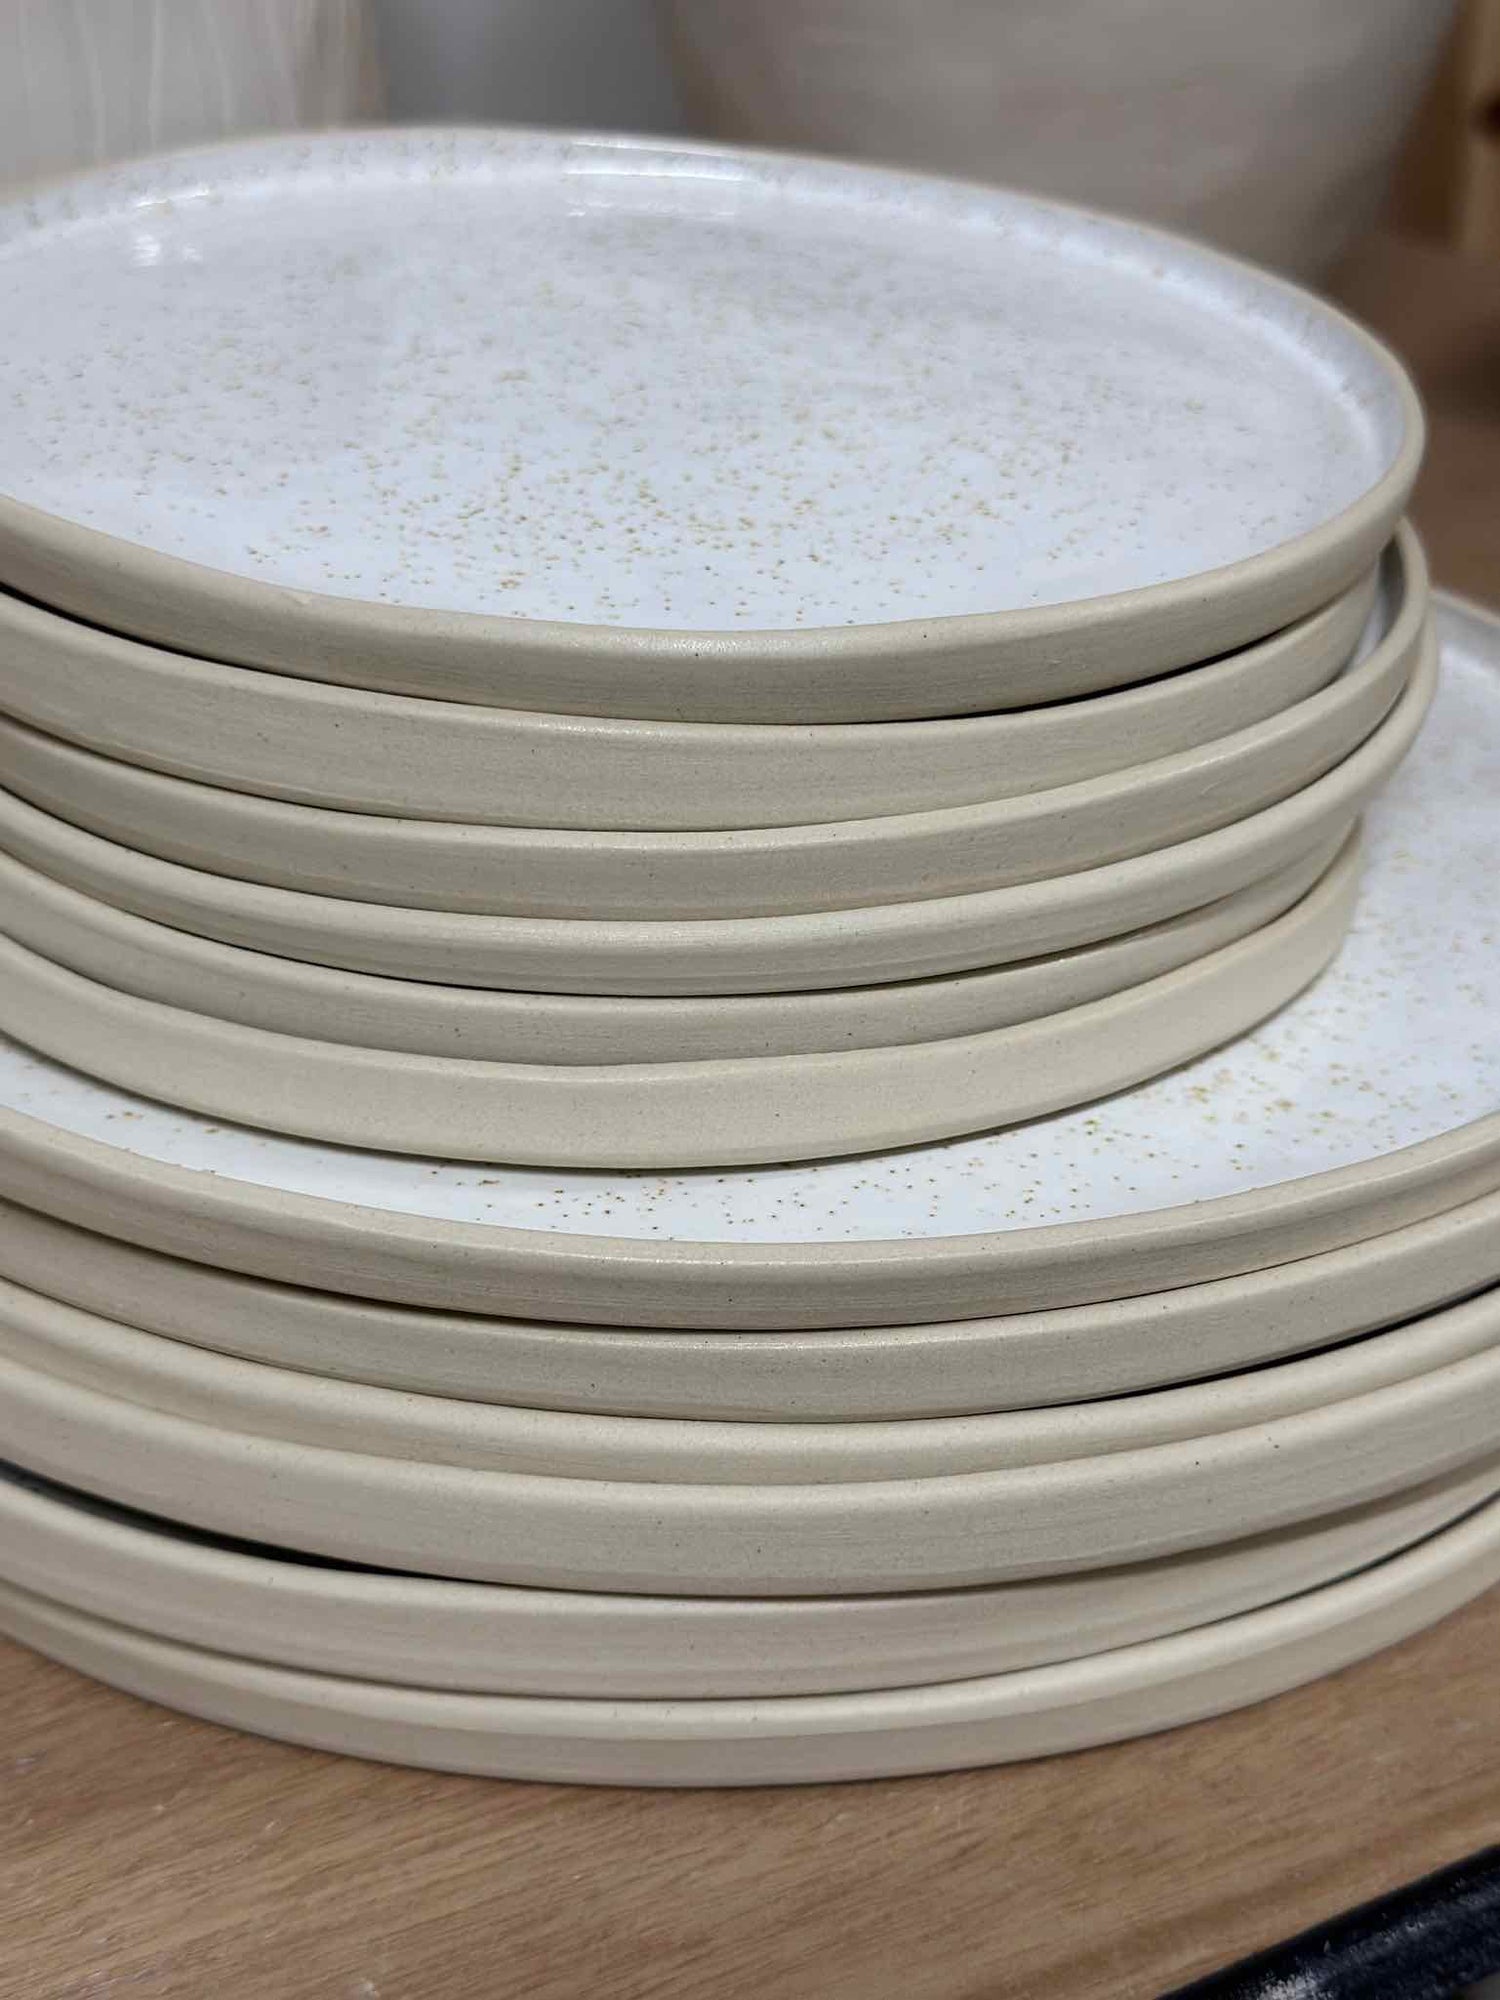 Stack of white clay dinner and side plates in speckled white glaze